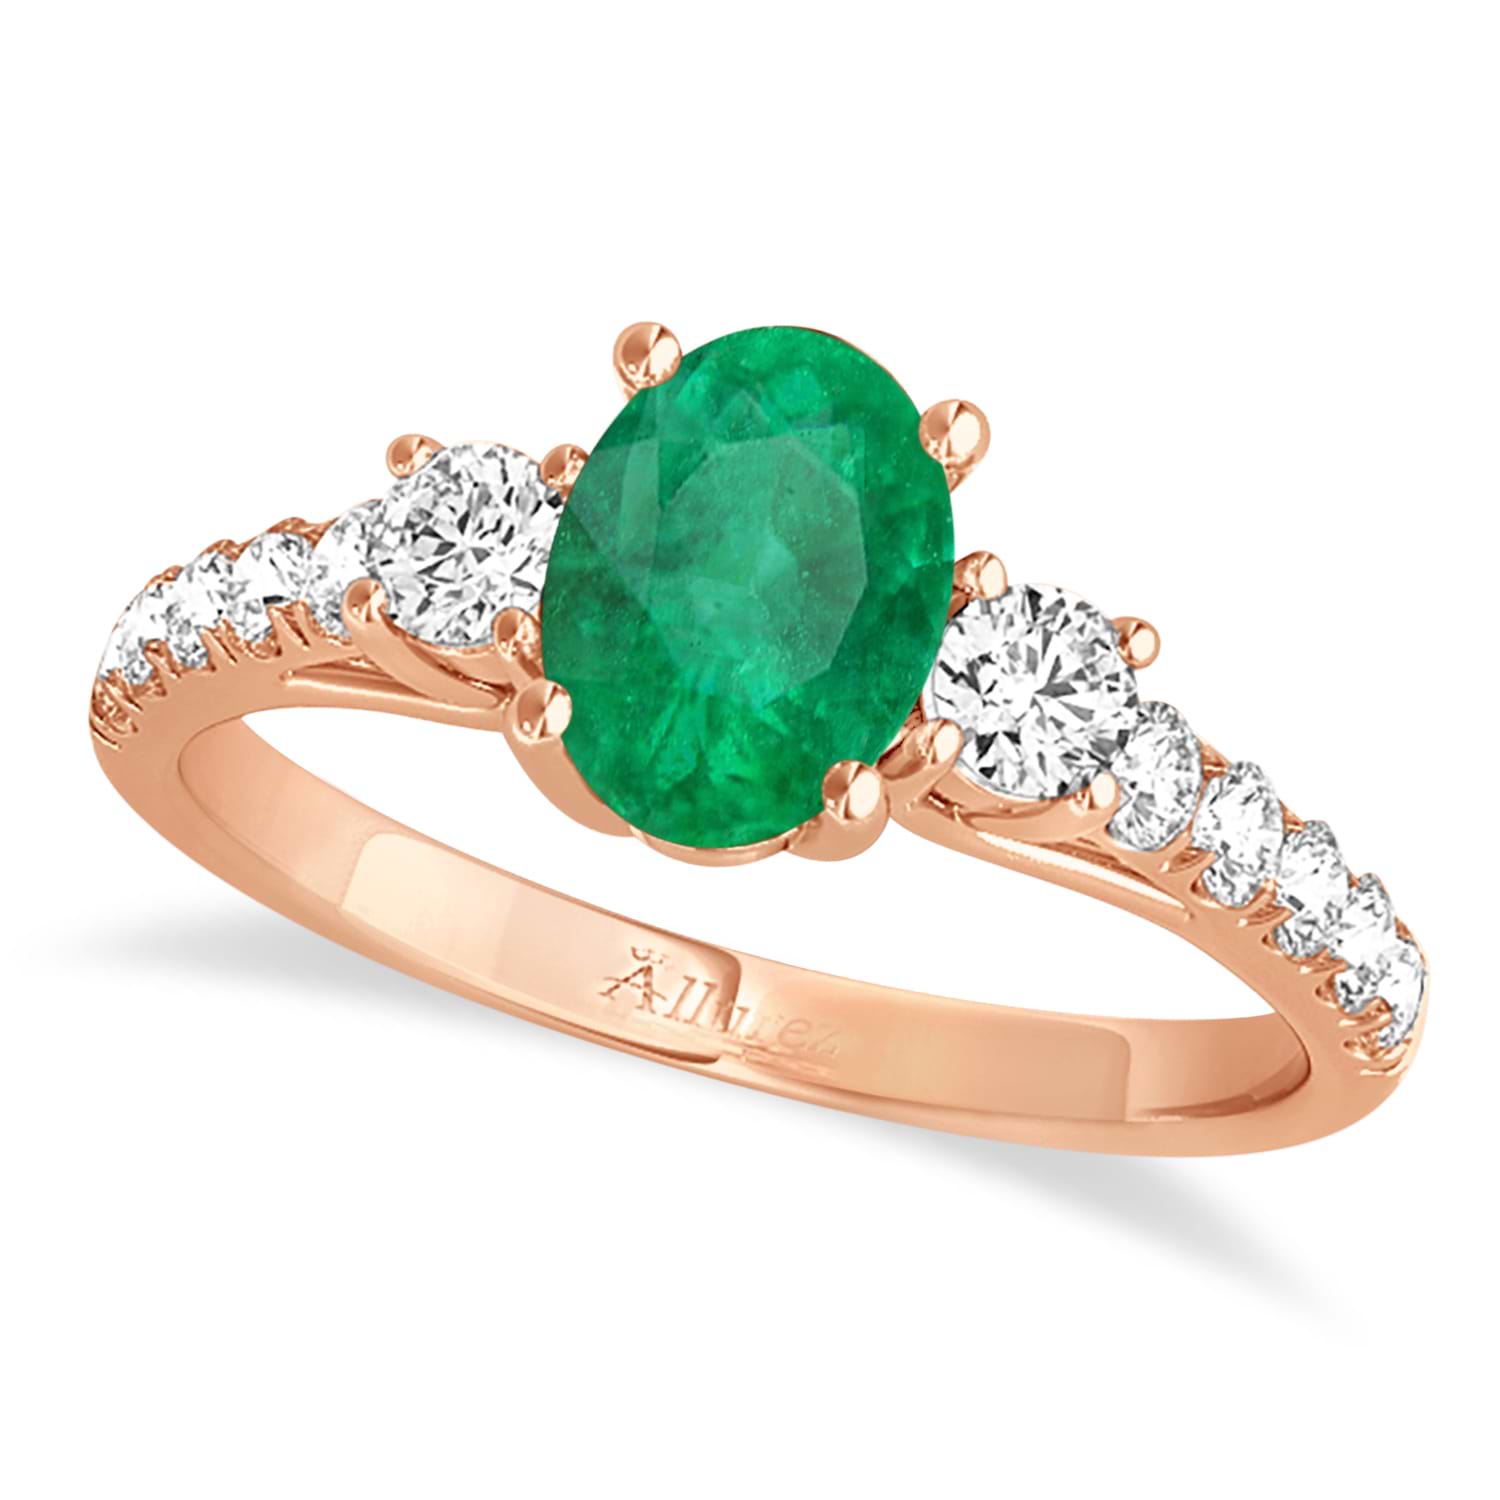 Oval Cut Emerald & Diamond Engagement Ring 14k Rose Gold (1.40ct)